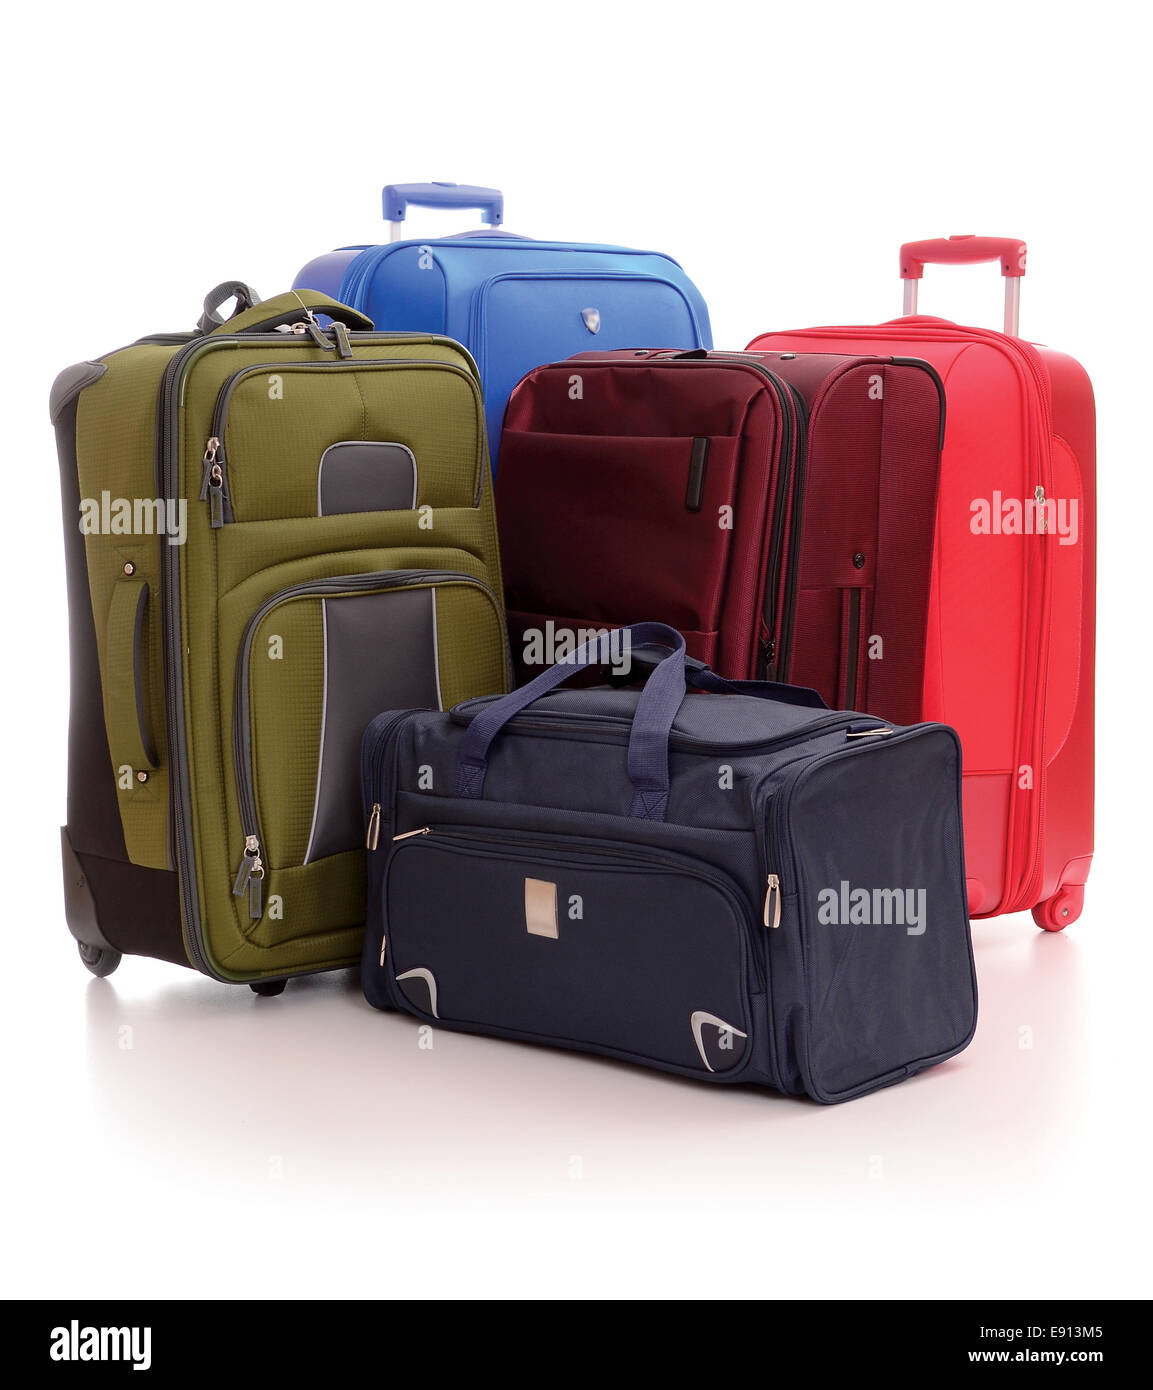 Luggage consisting of large suitcases Stock Photo